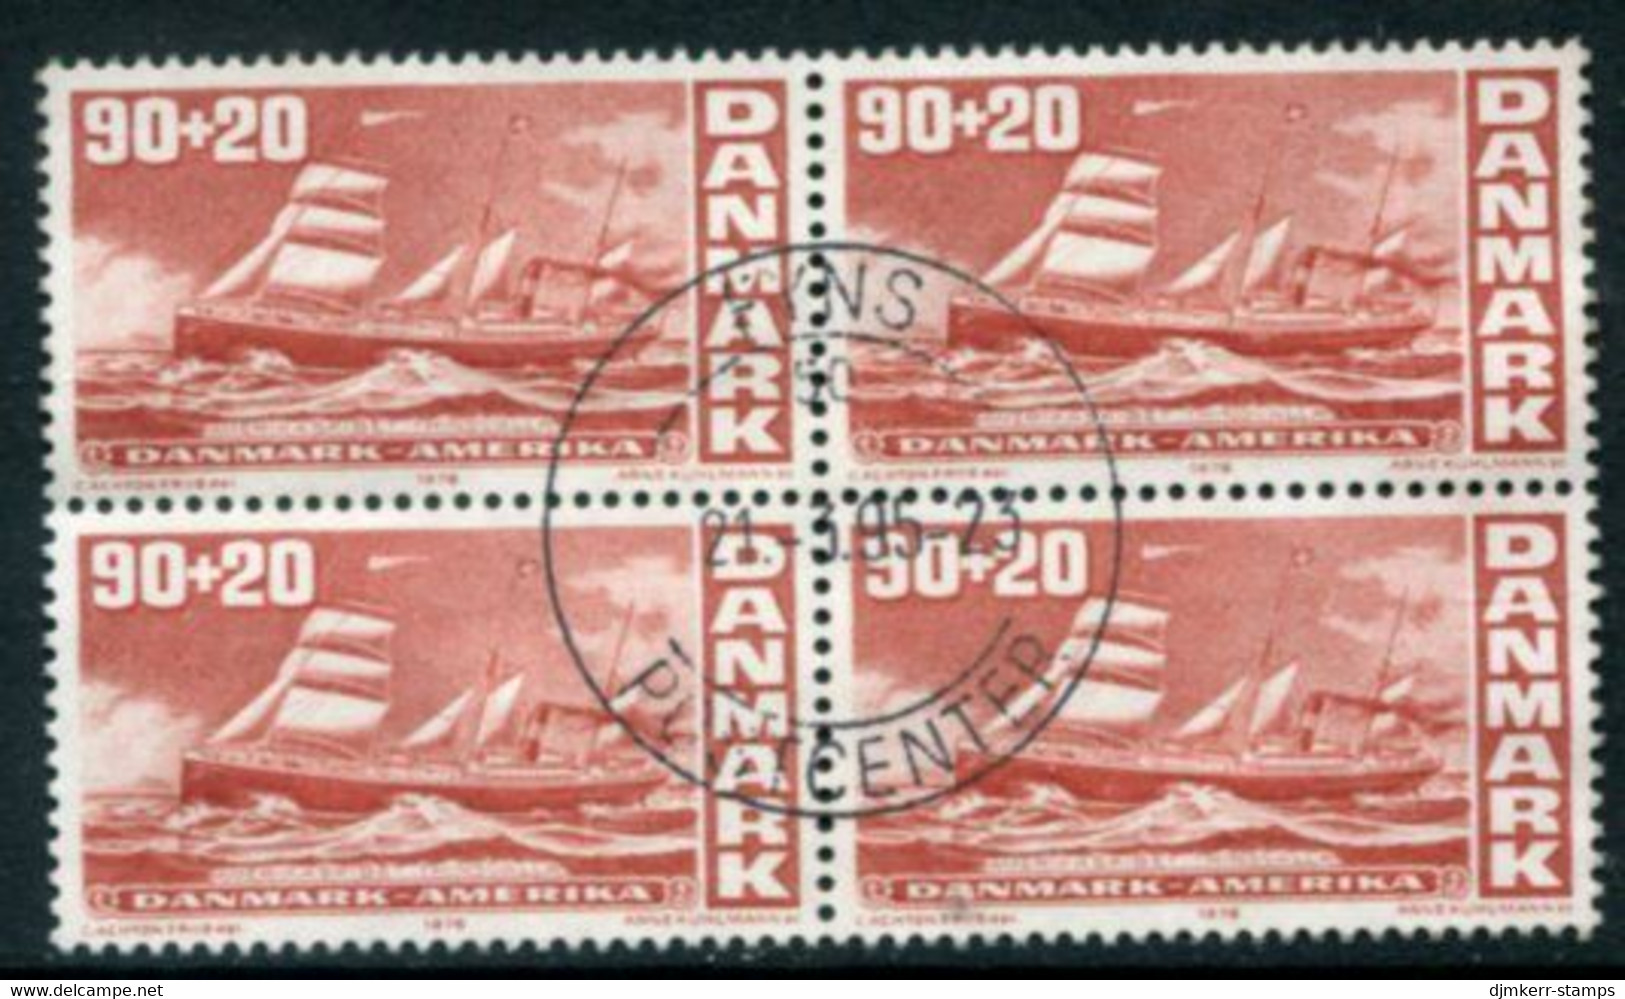 DENMARK 1976 Bicentenary Of US Independence 90+20 Øre. Block Of 4 Used   Michel 612 - Usati